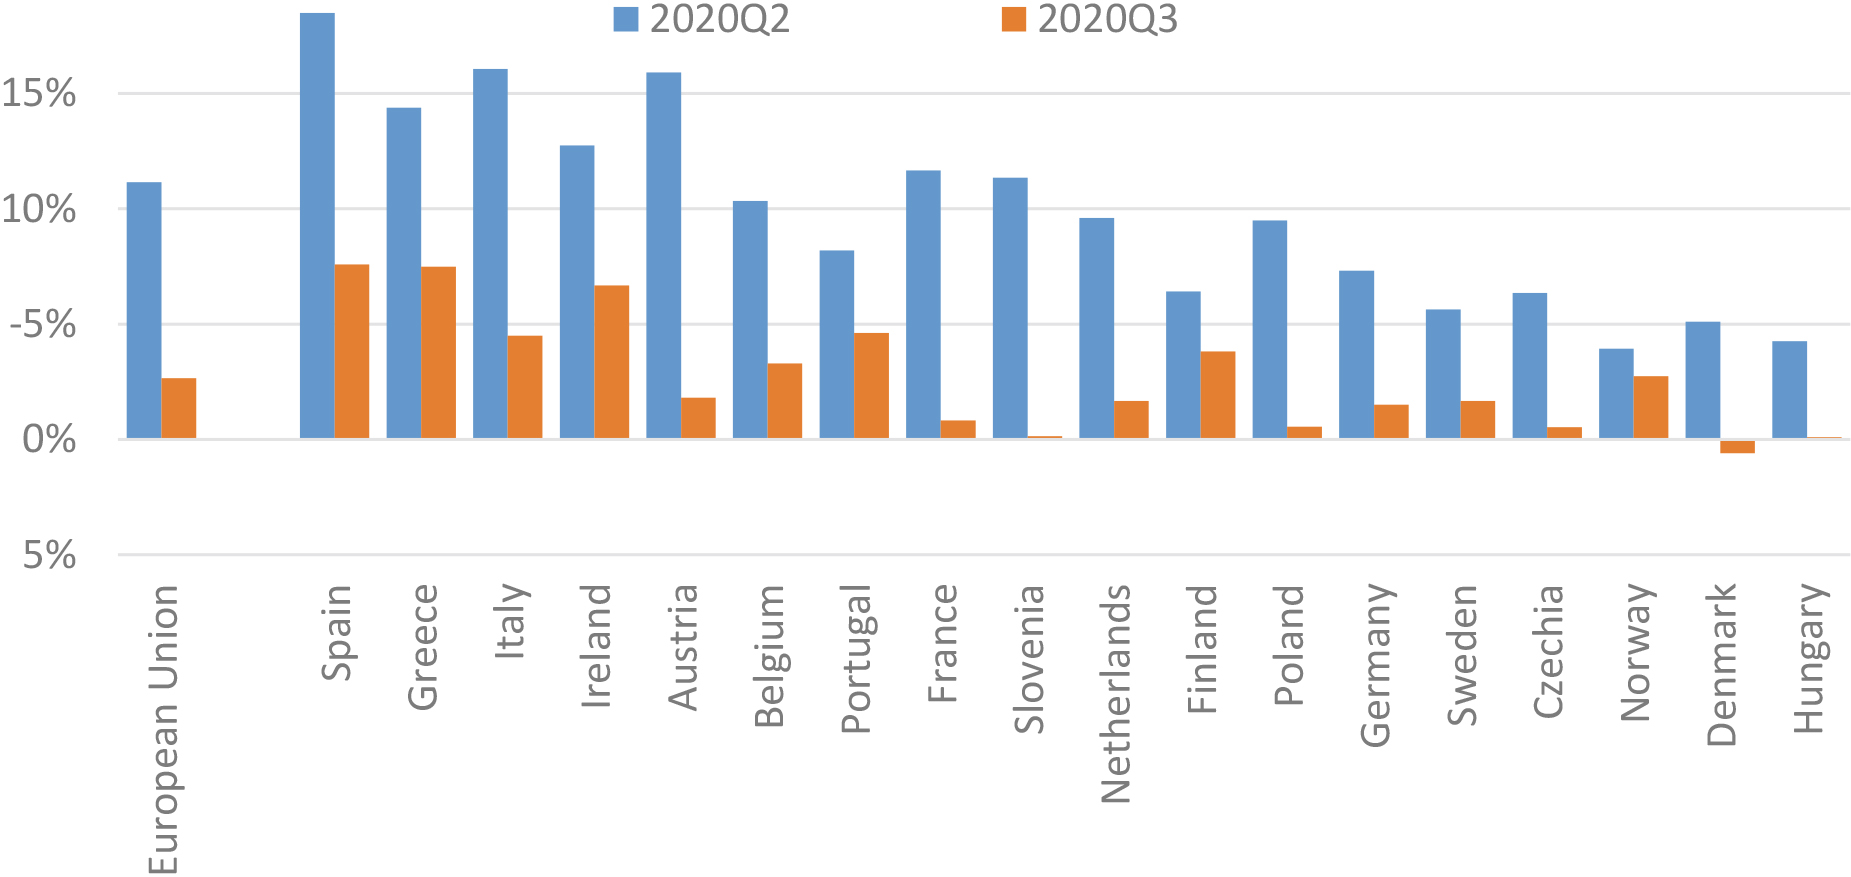 Theoretical loss of generated income, second and third quarter of 2020. Notes: TLGI is computed as percentage of the generated income recorded in 2019. Countries are sorted by decreasing values of TLGI (second and third quarters’ average values). Source: Non-seasonally adjusted quarterly sector accounts data, second and third quarter of 2020 [8, vintage April 2022].